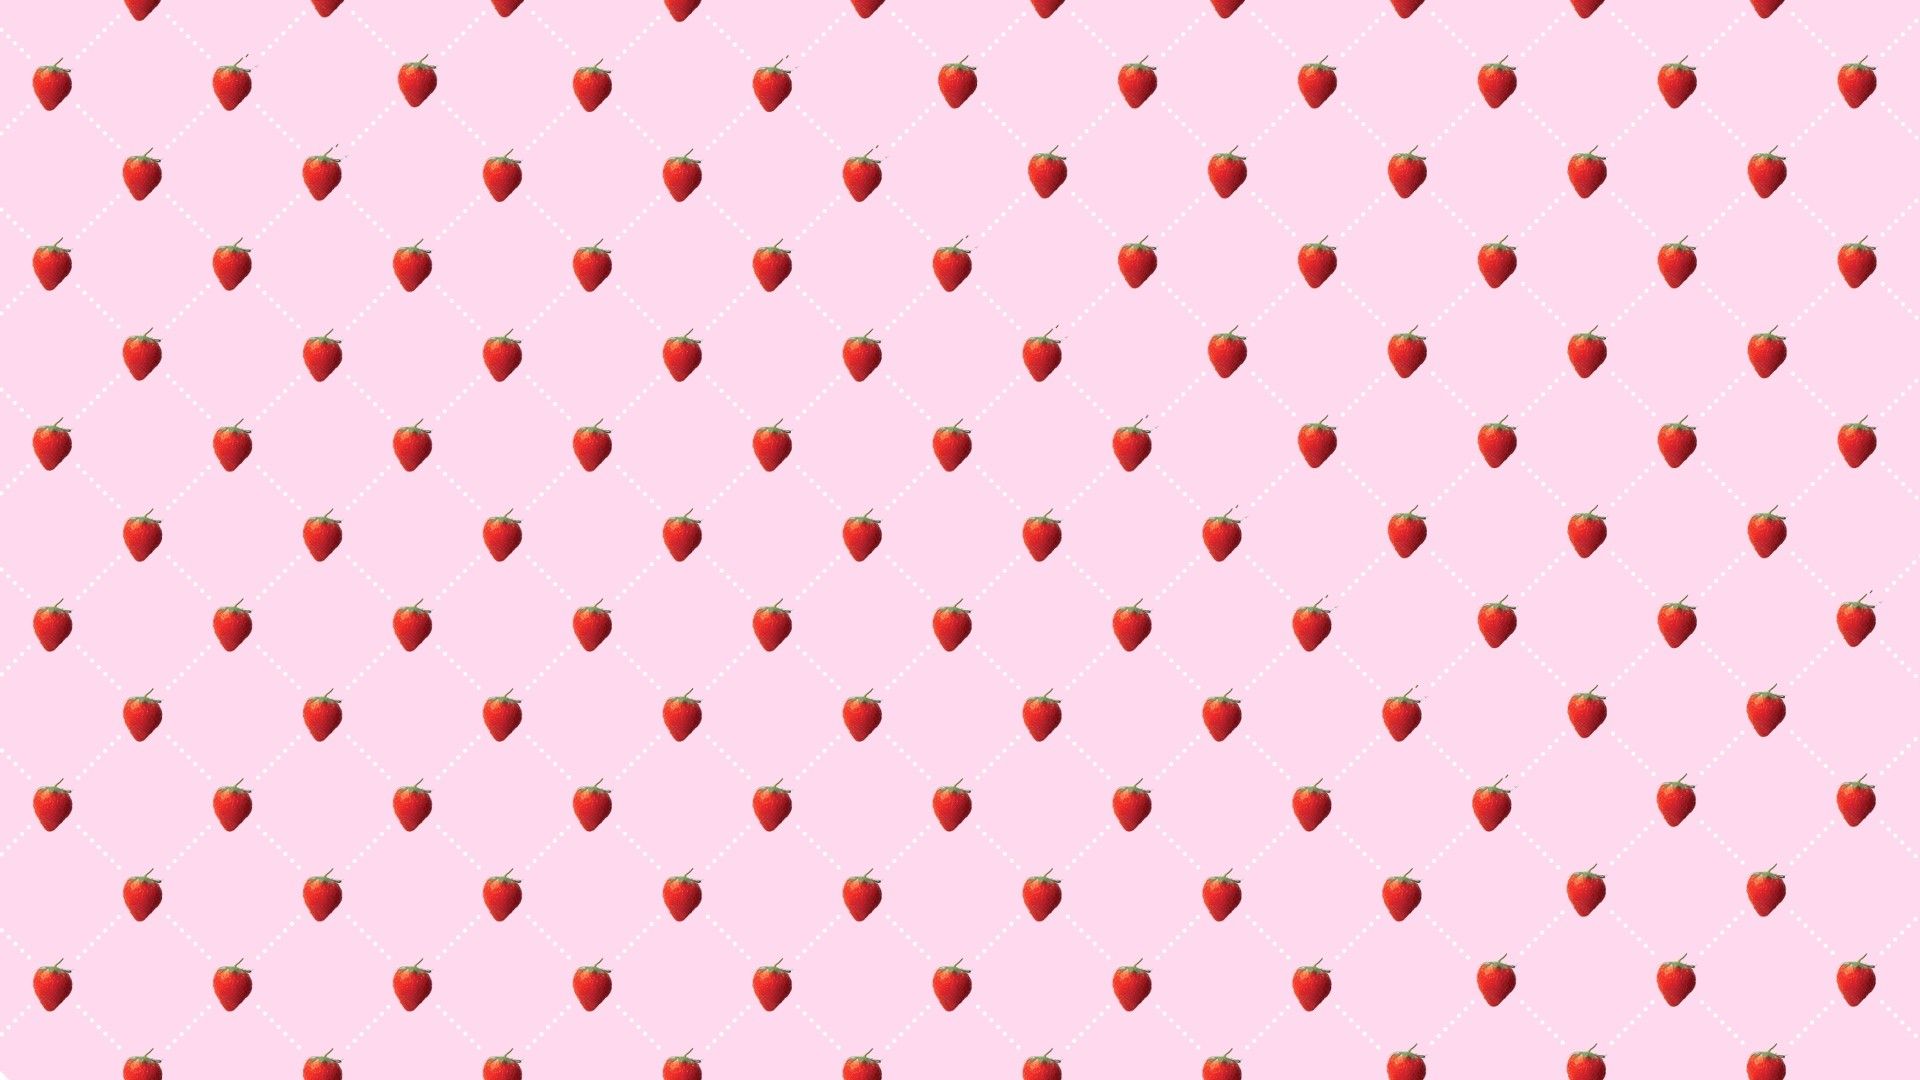 Strawberry Aesthetic Wallpapers On Wallpaperdog Feel free to share aesthetic wallpapers and background images with your friends. strawberry aesthetic wallpapers on